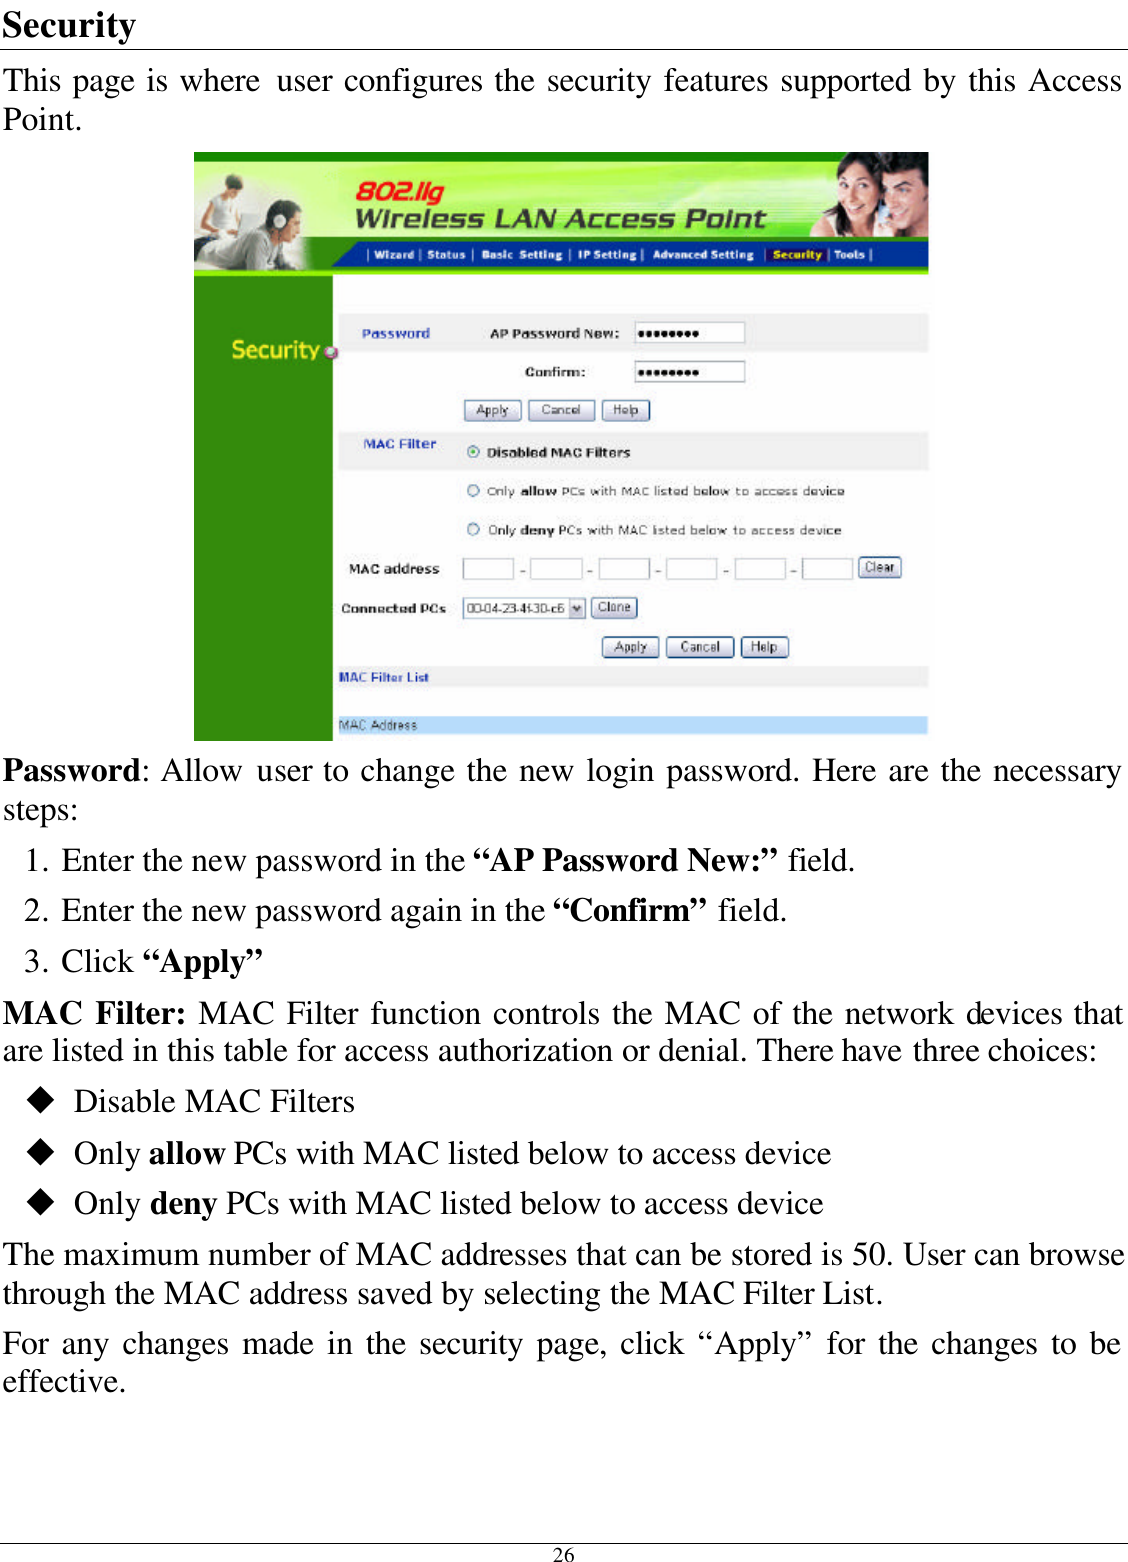 26 Security This page is where user configures the security features supported by this Access Point.  Password: Allow user to change the new login password. Here are the necessary steps: 1. Enter the new password in the “AP Password New:” field. 2. Enter the new password again in the “Confirm” field. 3. Click “Apply” MAC Filter: MAC Filter function controls the MAC of the network devices that are listed in this table for access authorization or denial. There have three choices: u Disable MAC Filters u Only allow PCs with MAC listed below to access device u Only deny PCs with MAC listed below to access device The maximum number of MAC addresses that can be stored is 50. User can browse through the MAC address saved by selecting the MAC Filter List. For any changes made in the security page, click “Apply” for the changes to be effective. 